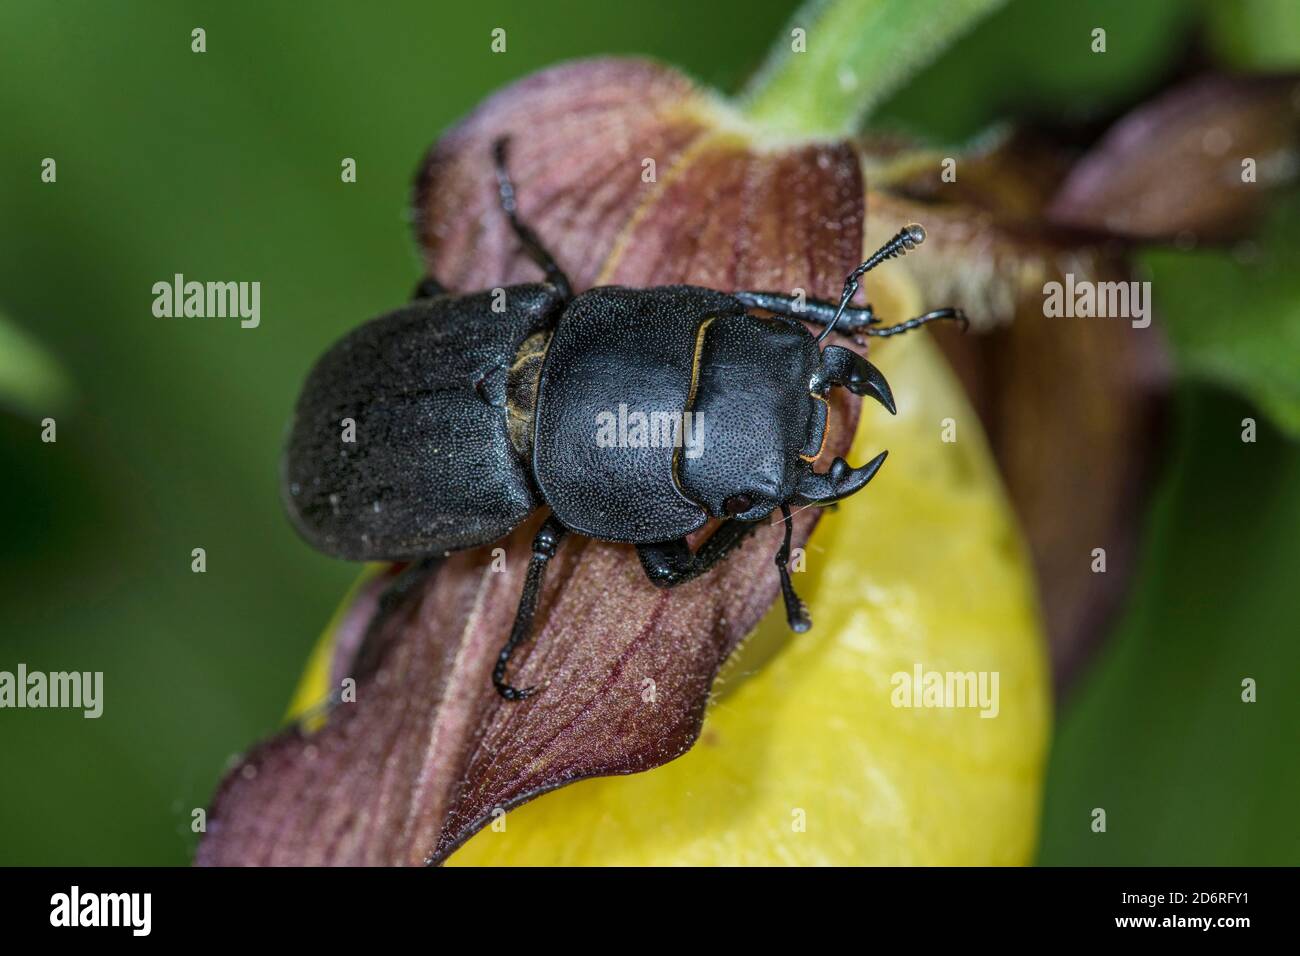 Lesser stag beetle (Dorcus parallelipipedus), sits on a flower, Germany Stock Photo